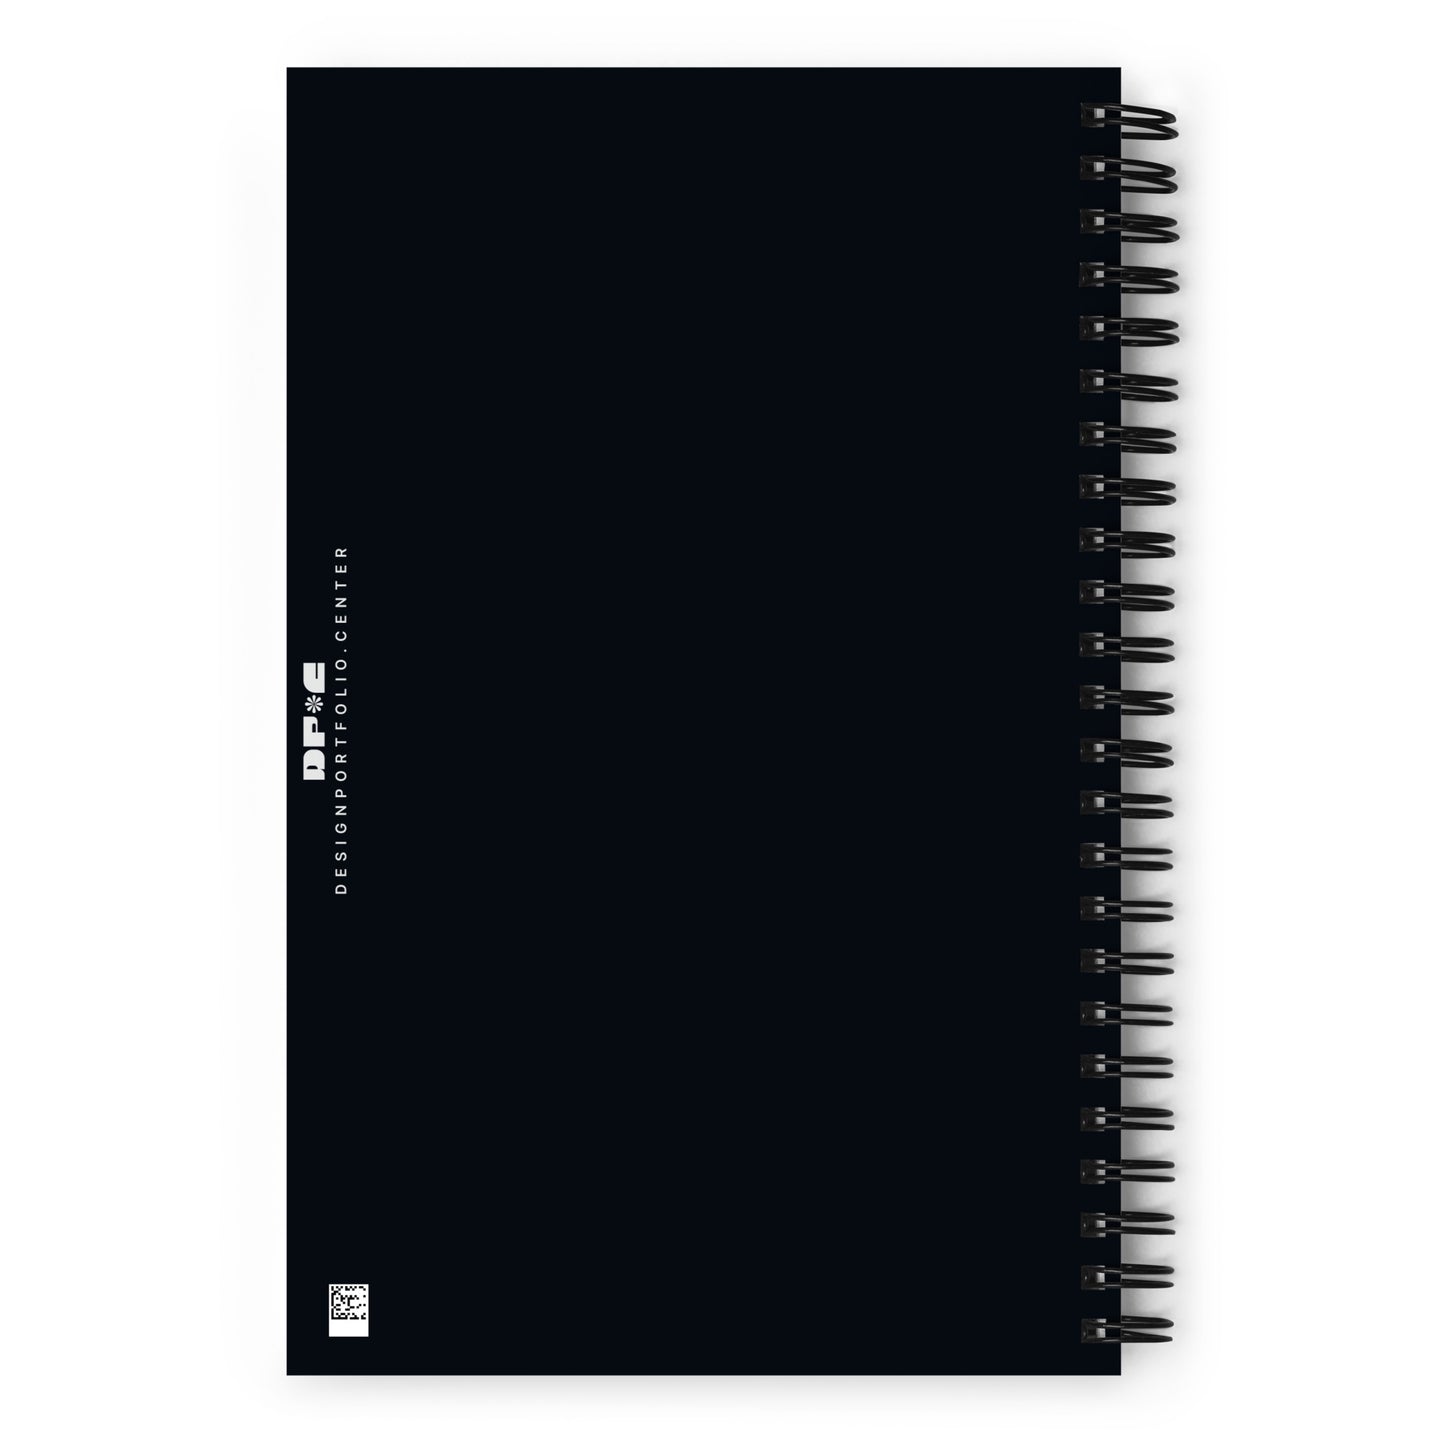 A black cover of a notebook.